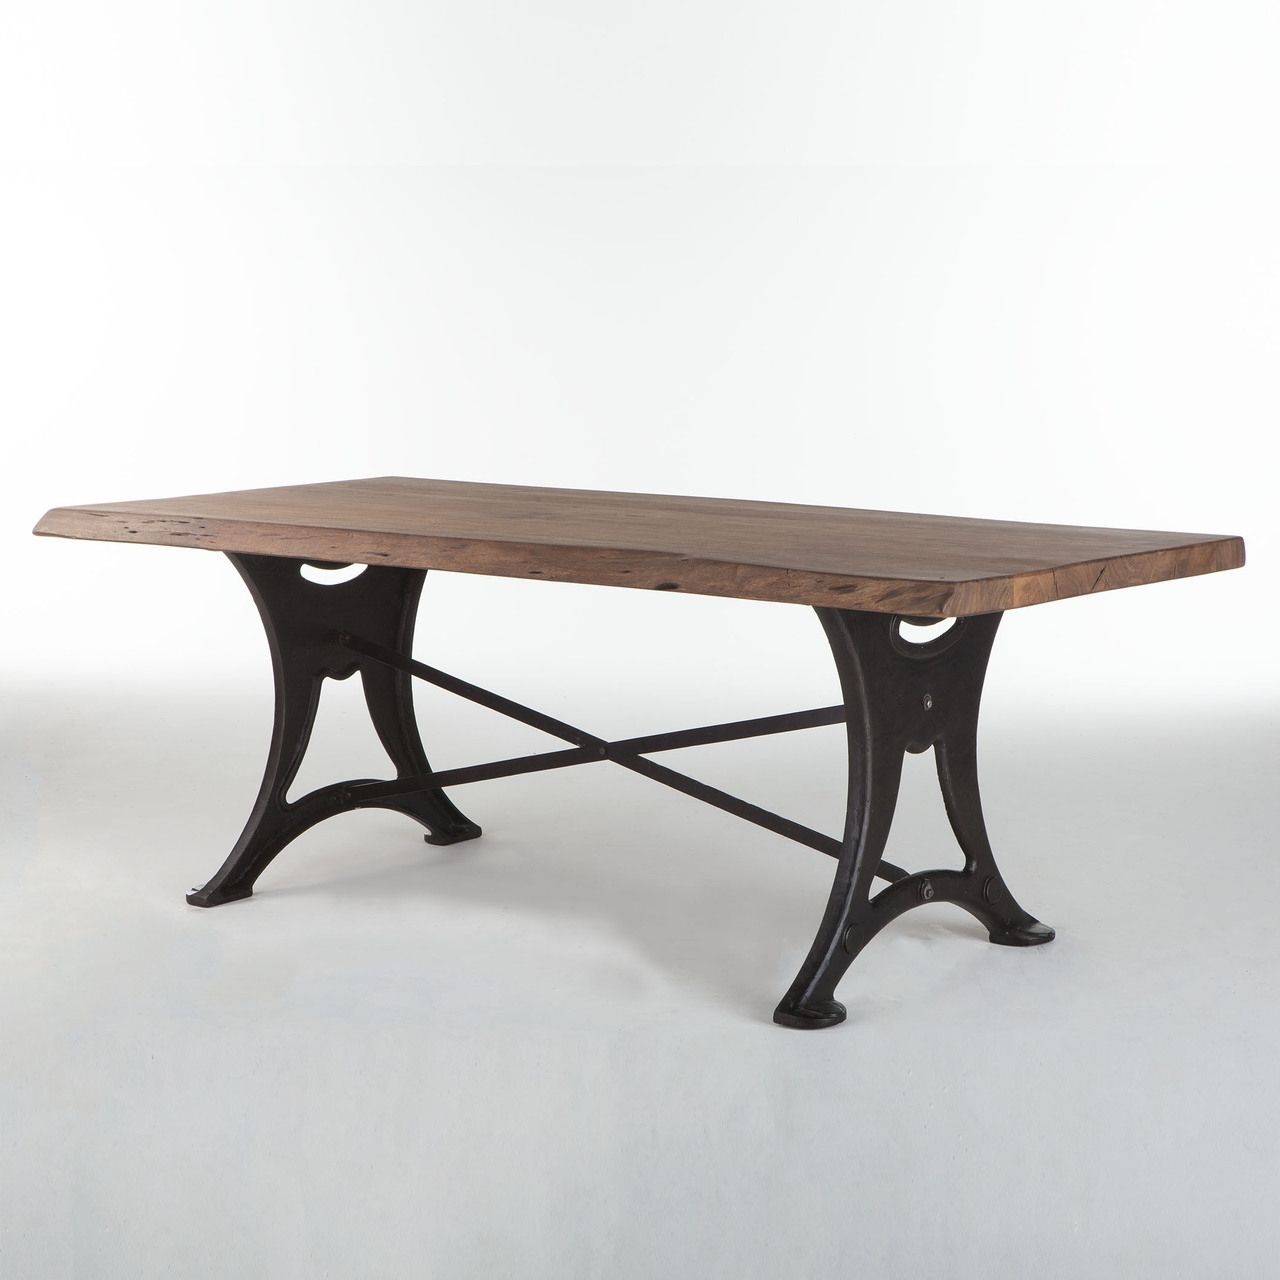 Organic Forge 106″ Solid Wood Dining Table In Raw Walnut W/ Cast With Regard To Most Popular Iron And Wood Dining Tables (View 23 of 25)